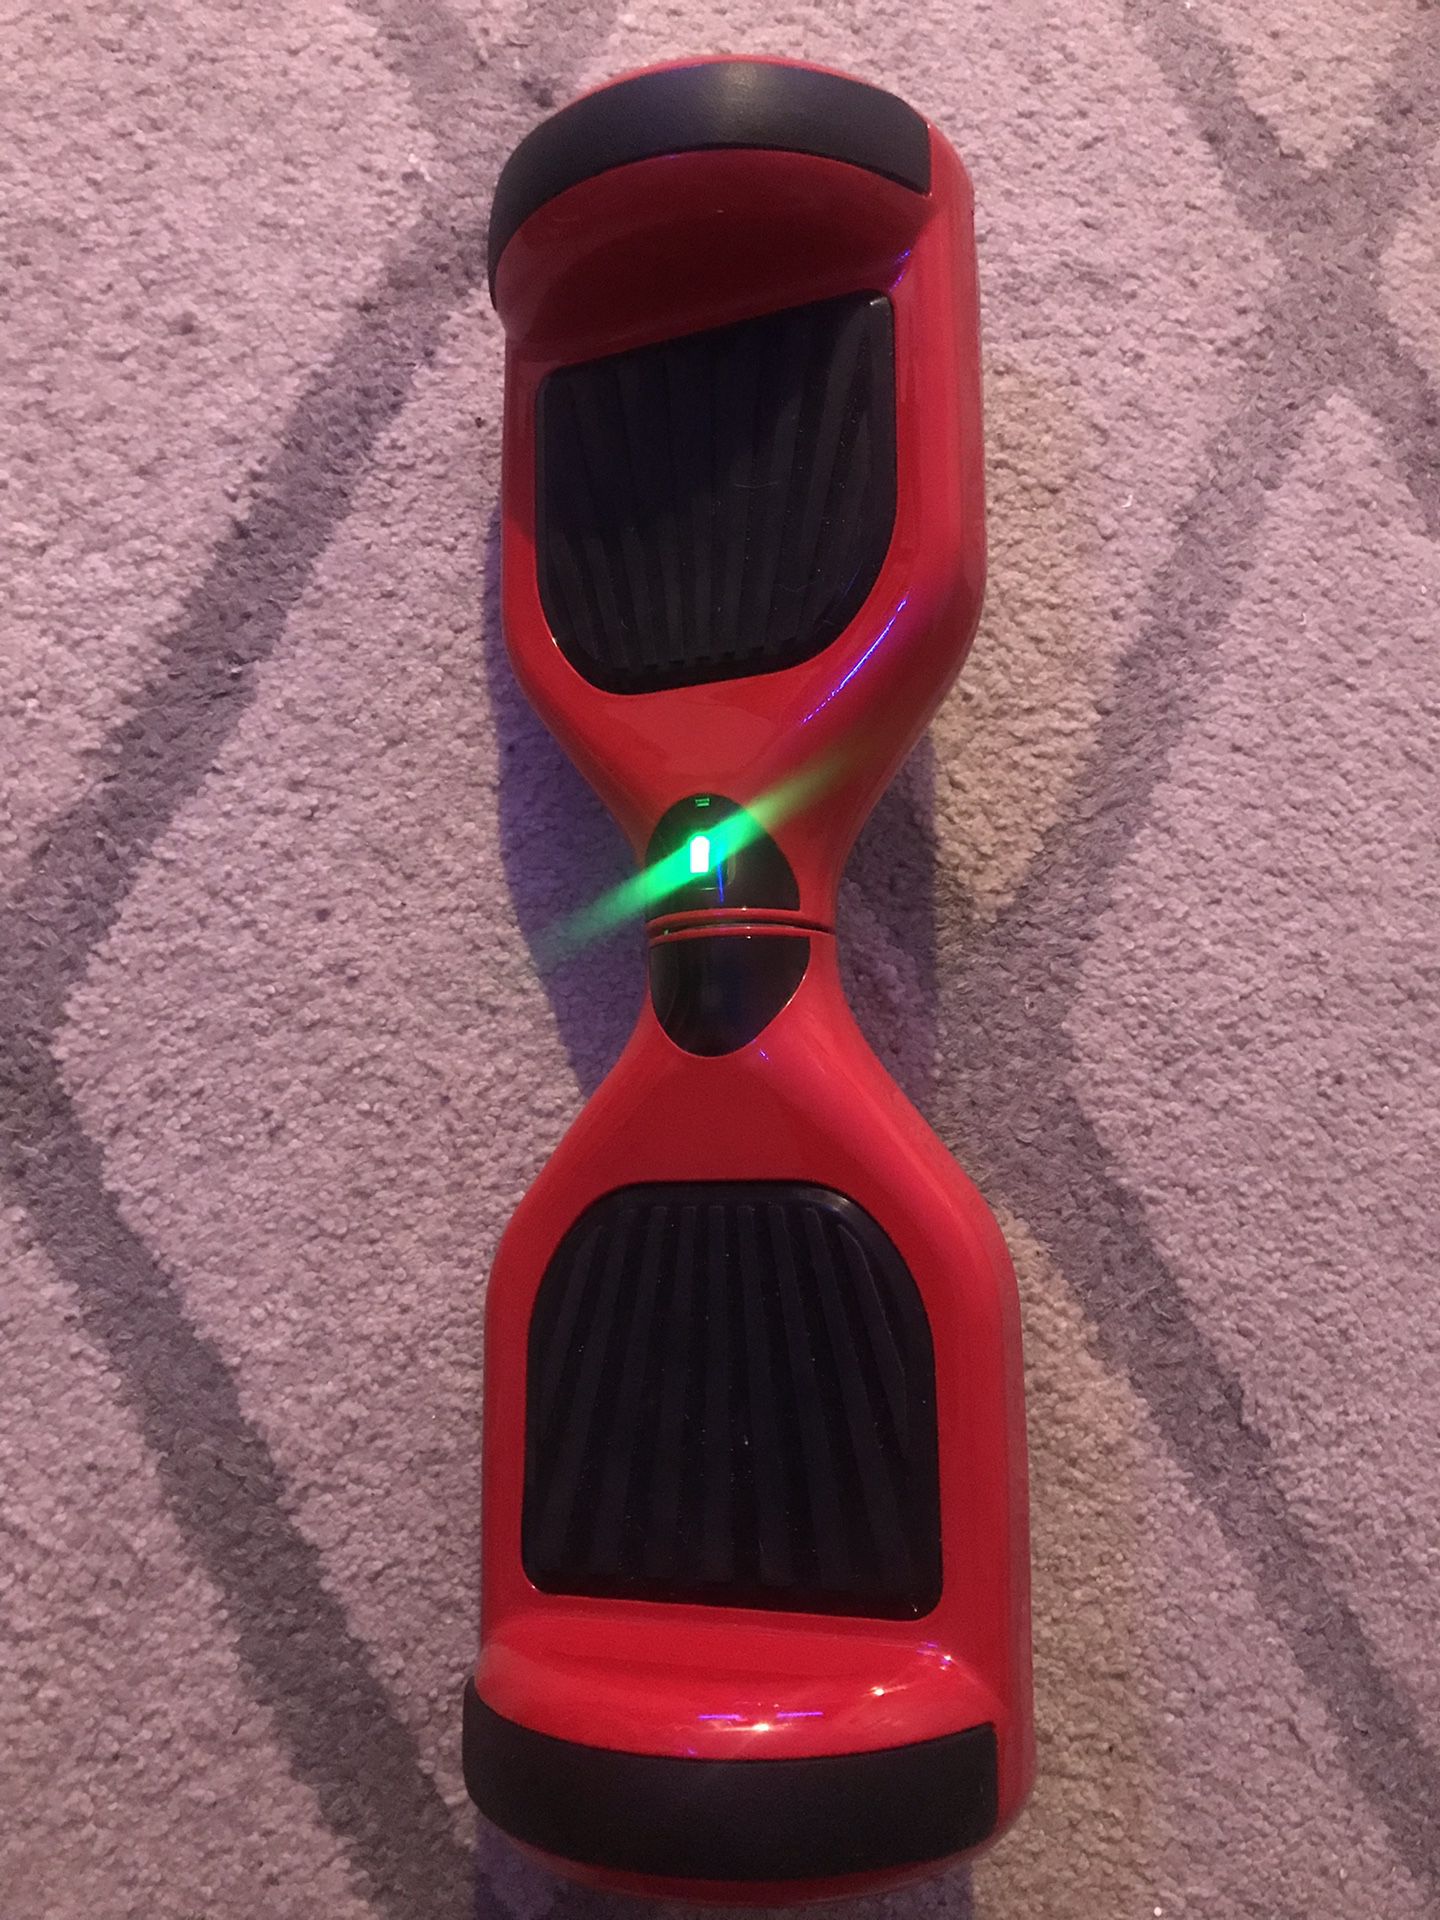 Hoverboard Red ( Brand New ) in Original Box Serious Buyers Only $100 Cash Only